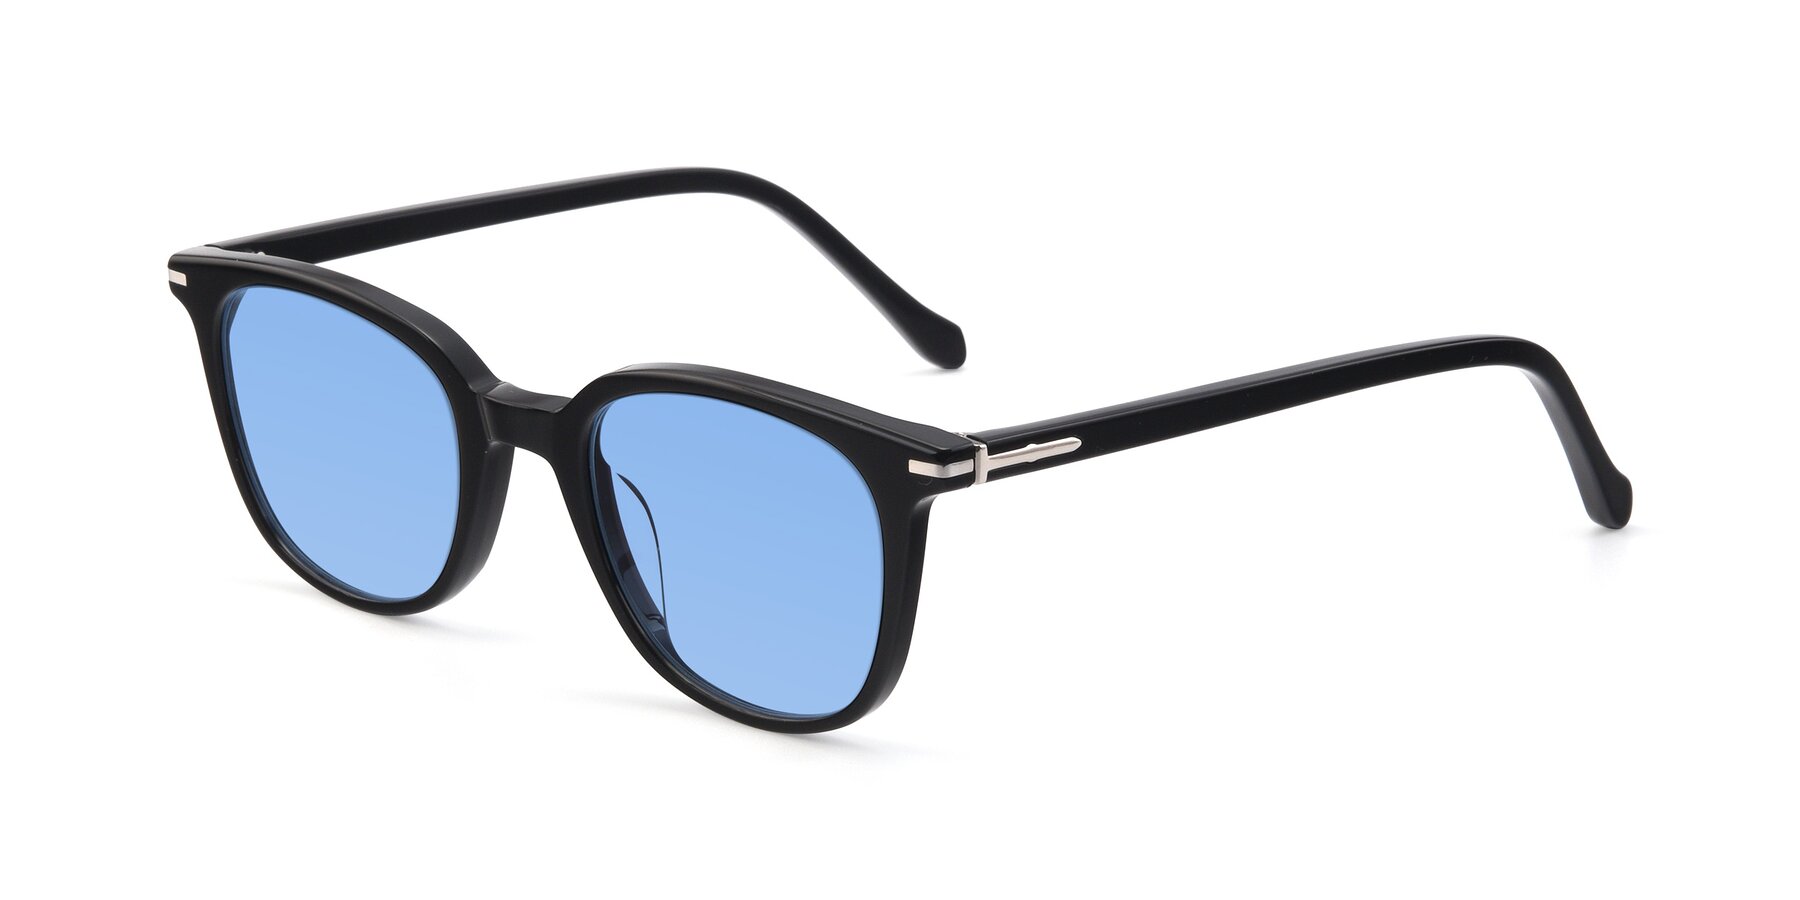 Angle of 17562 in Black with Medium Blue Tinted Lenses